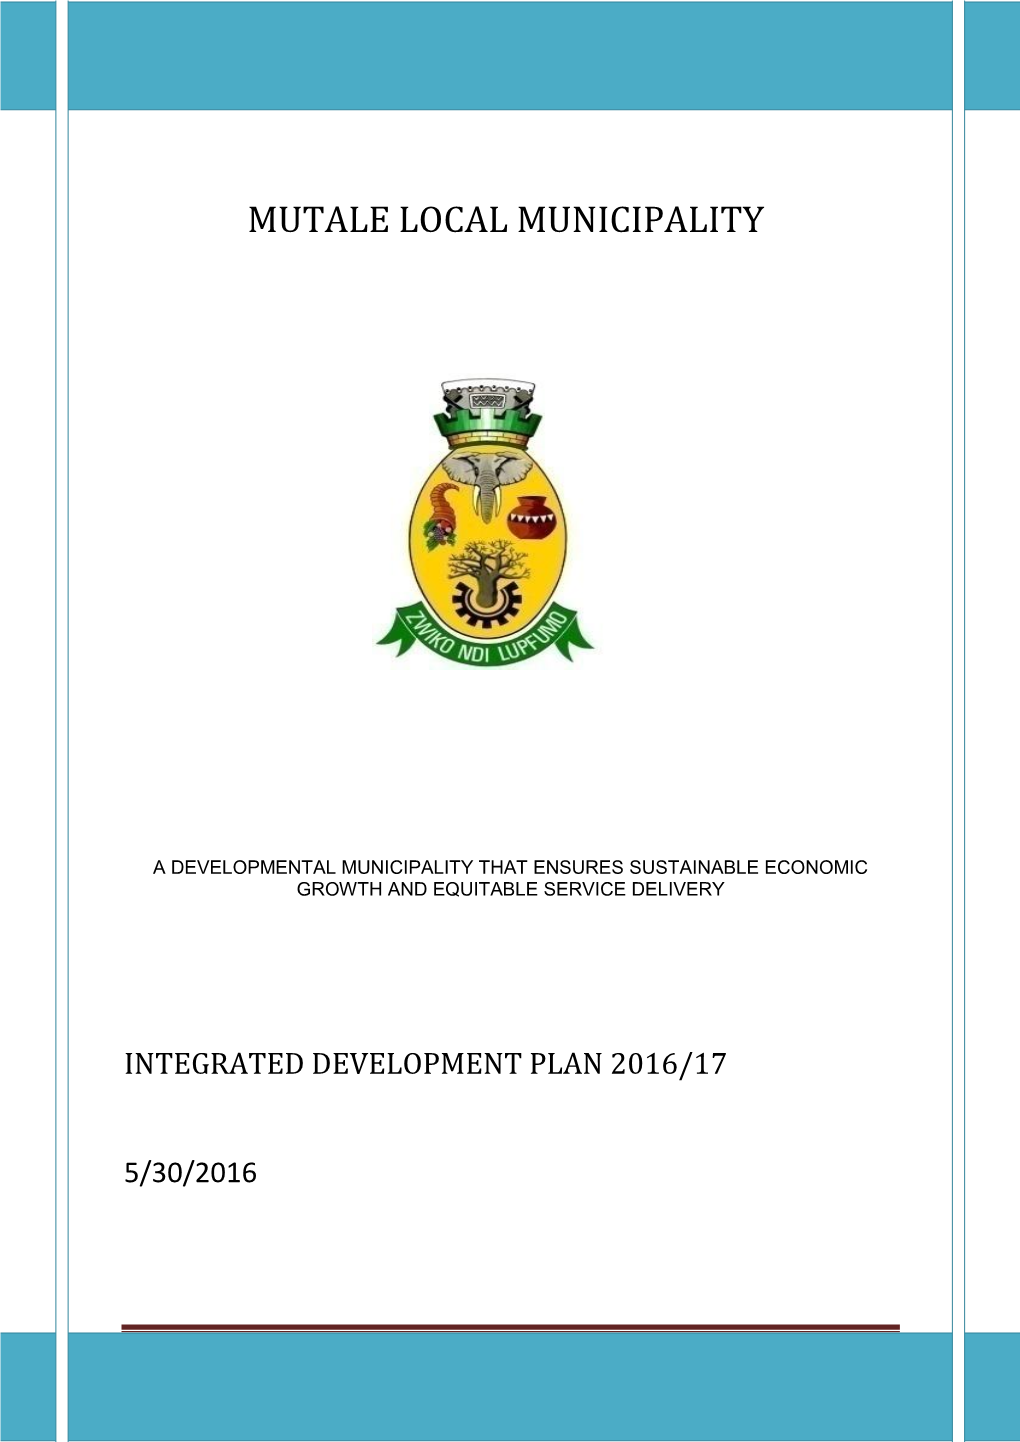 A Developmental Municipality That Ensures Sustainable Economic Growth and Equitable Service Delivery